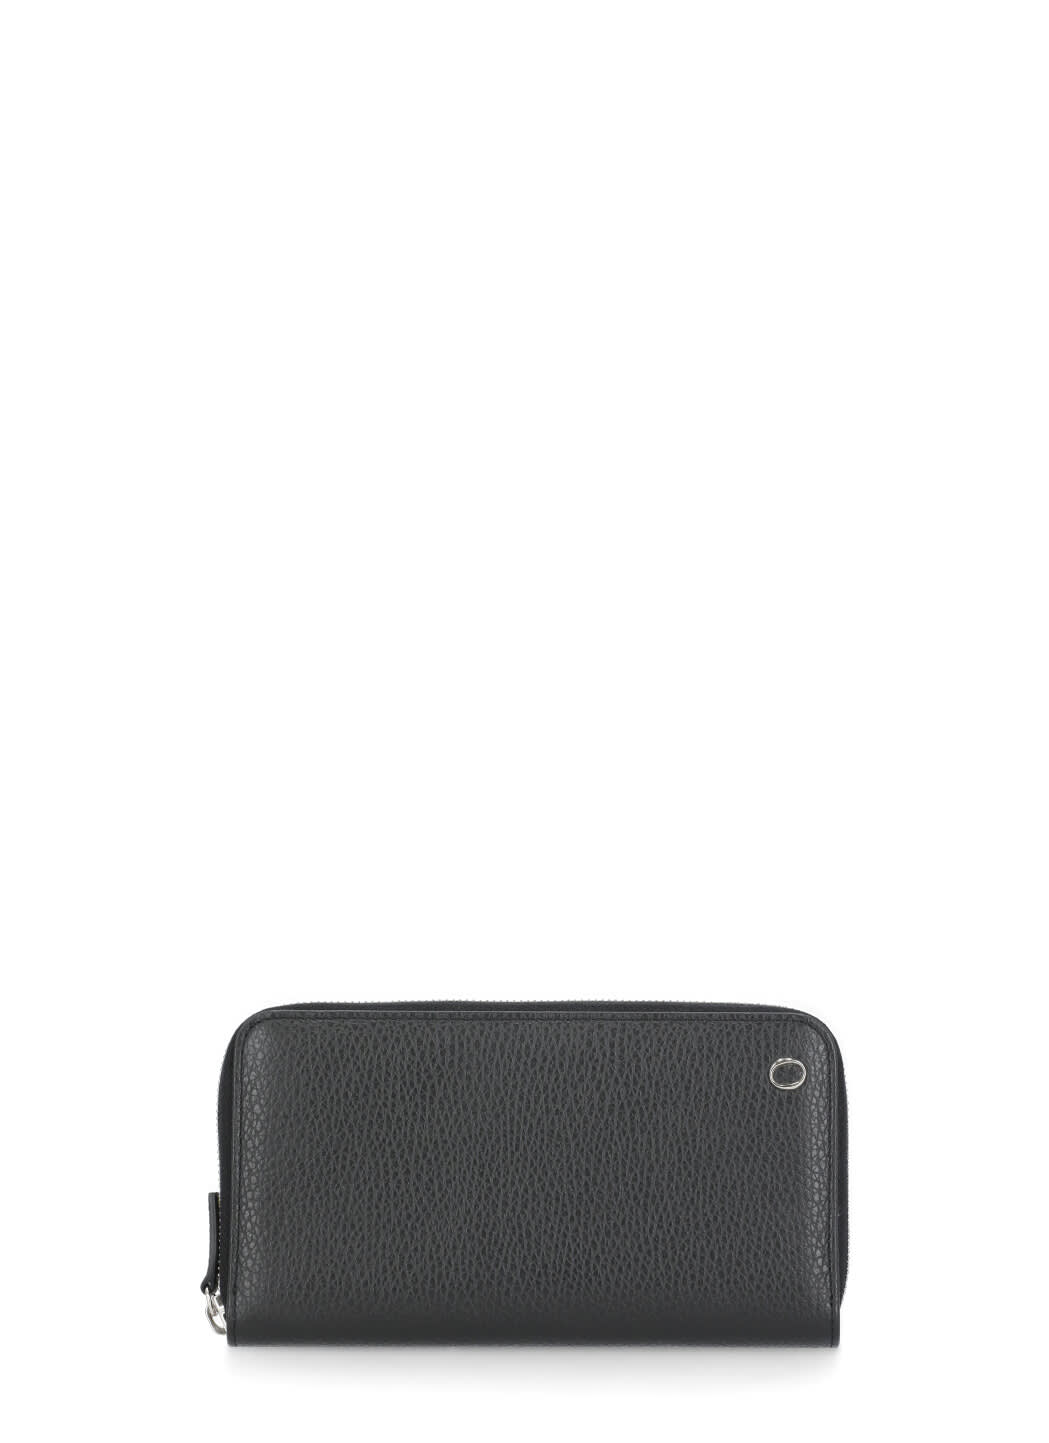 Orciani Micron Leather Wallet In Black